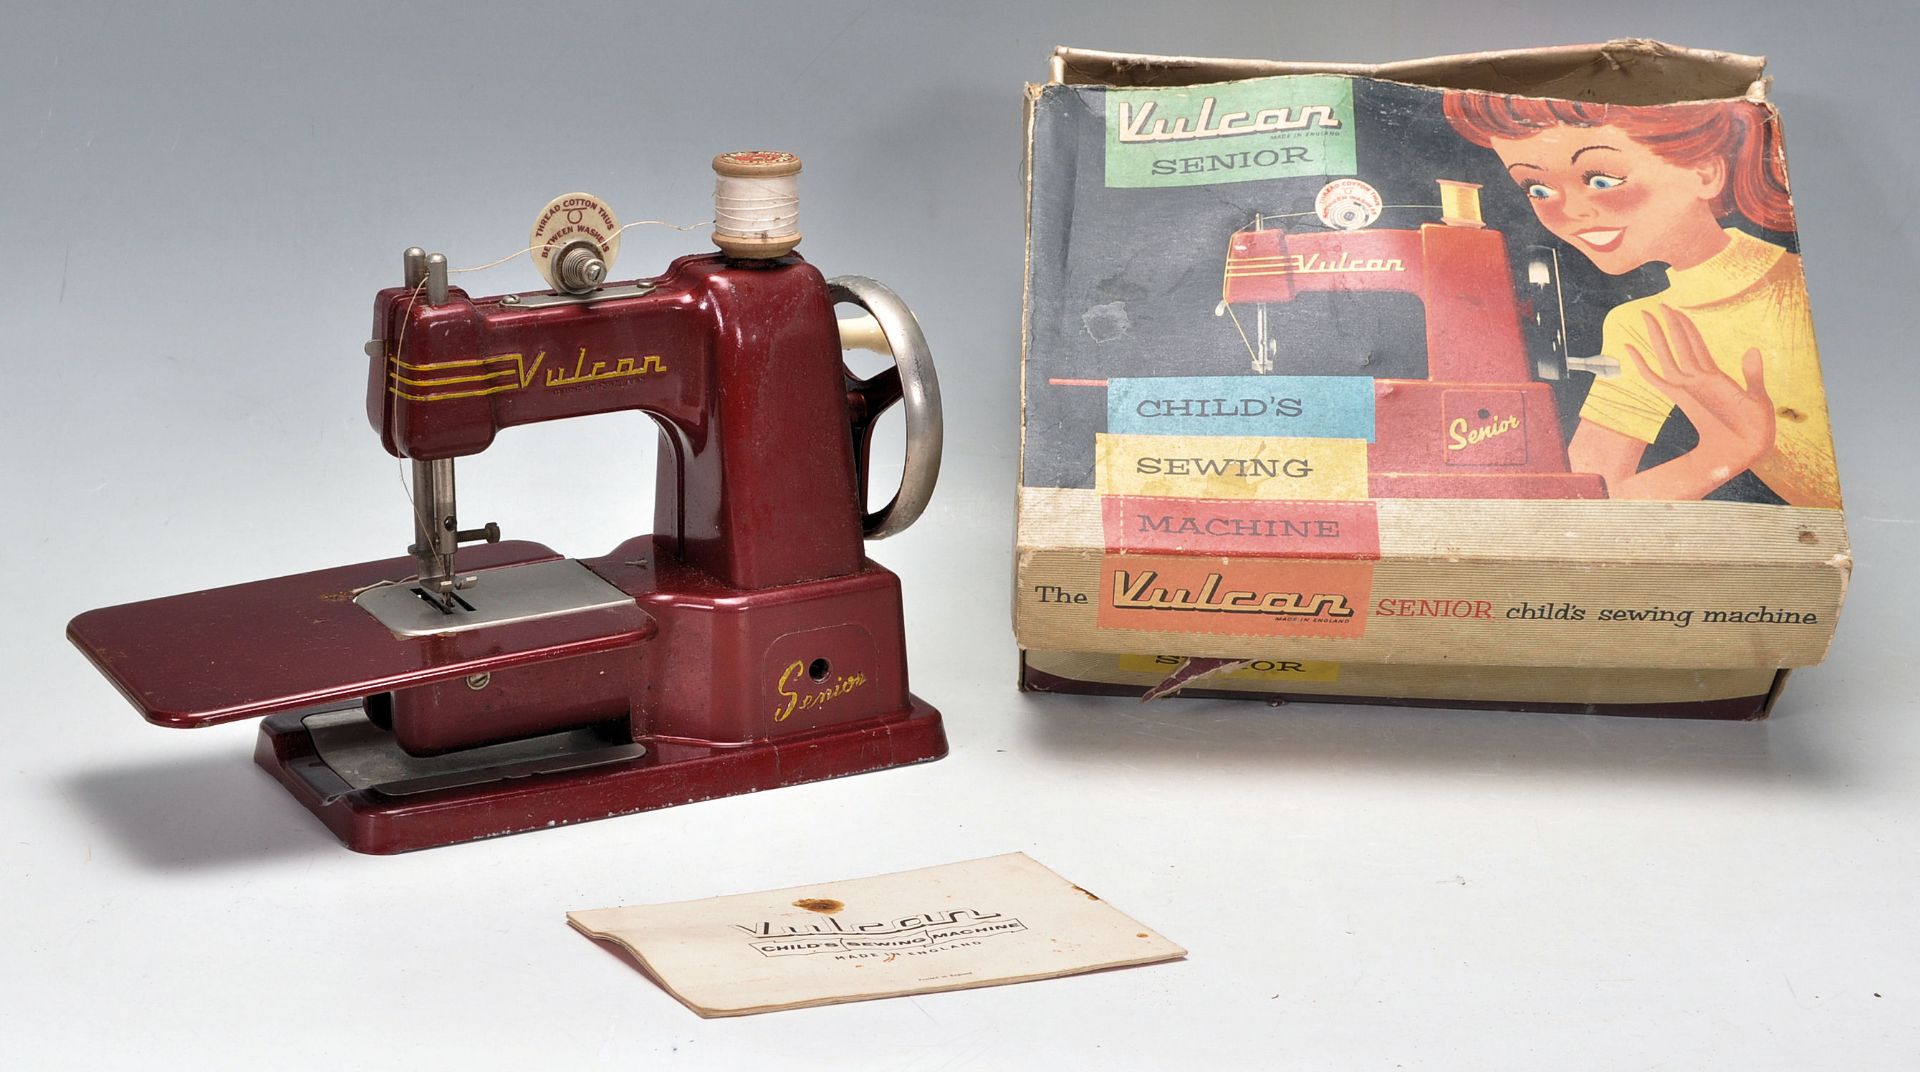 A vintage 20th Century Vulcan Senior childs sewing machine. Appears complete in the original box.